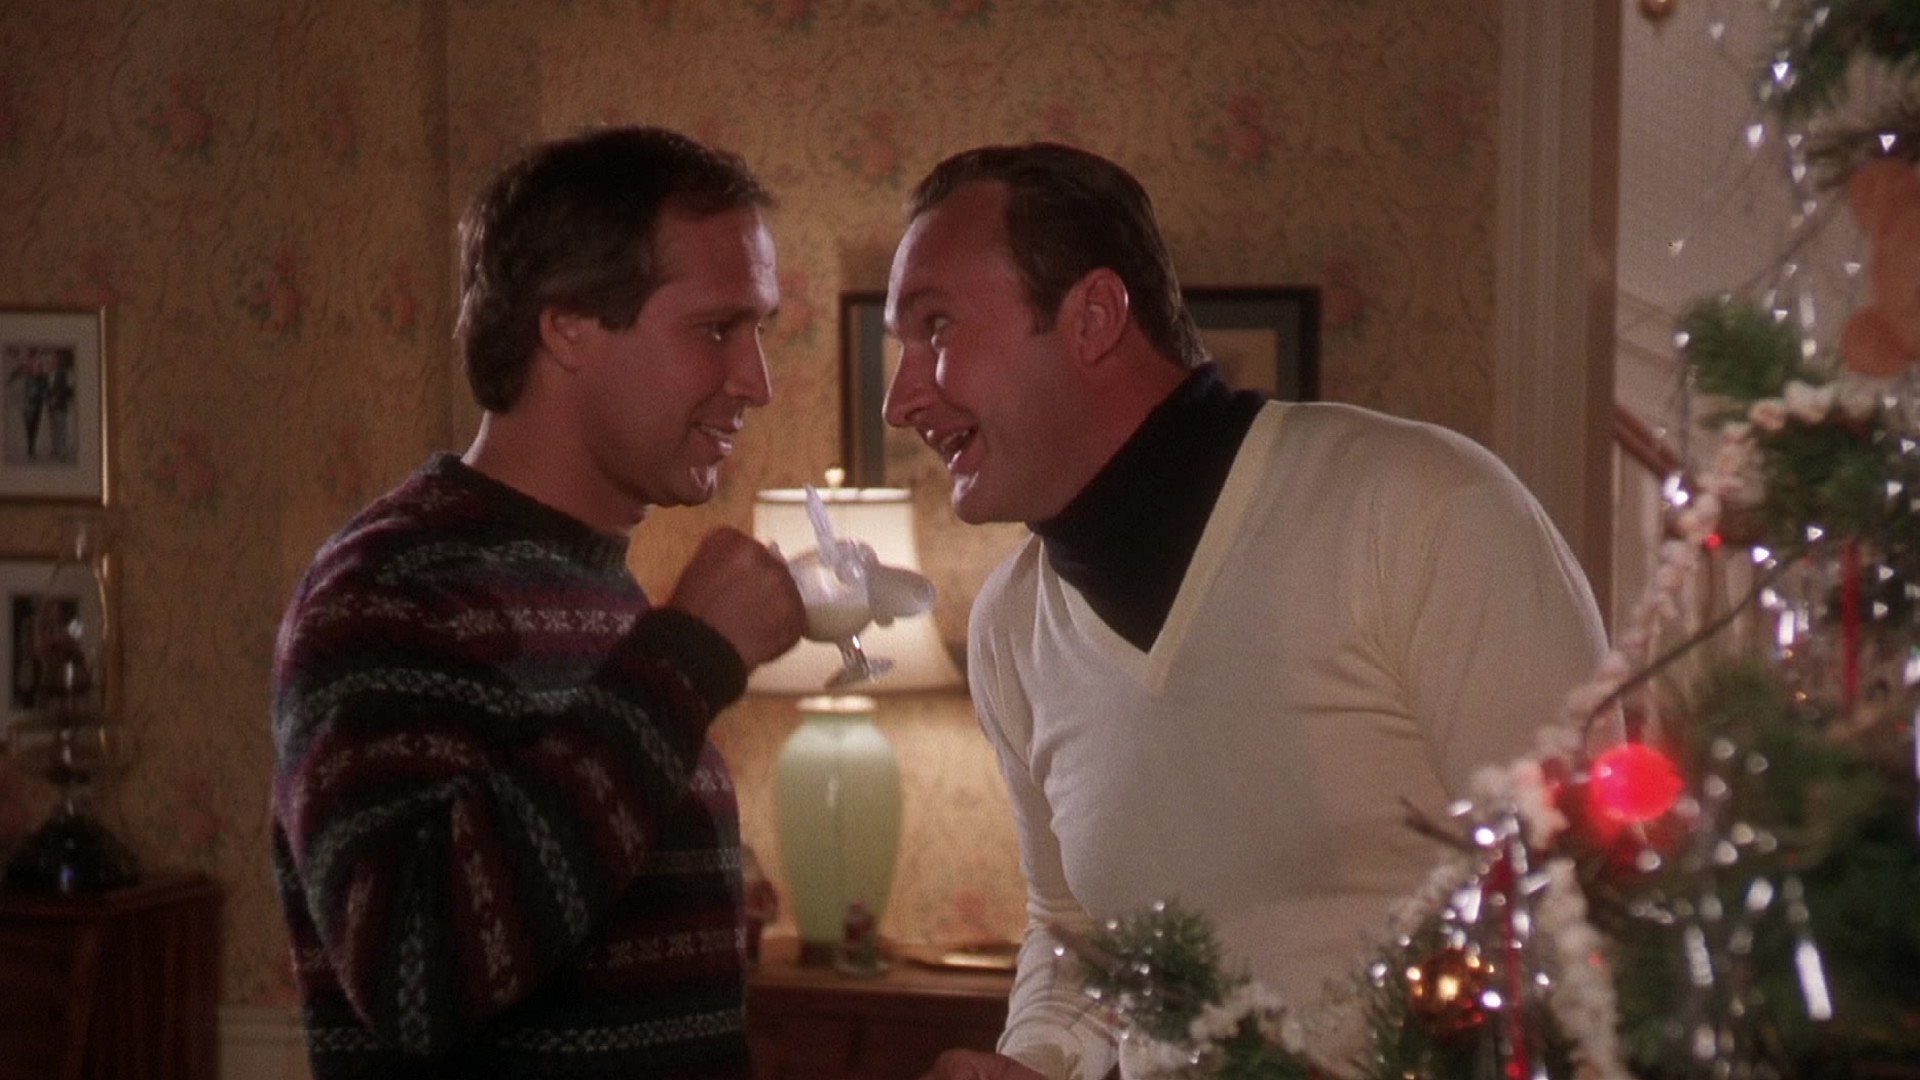 1920x1080 NATIONAL-LAMPOONS-CHRISTMAS-VACATION national lampoon christmas comedy g  wallpaper |  | 203995 | WallpaperUP